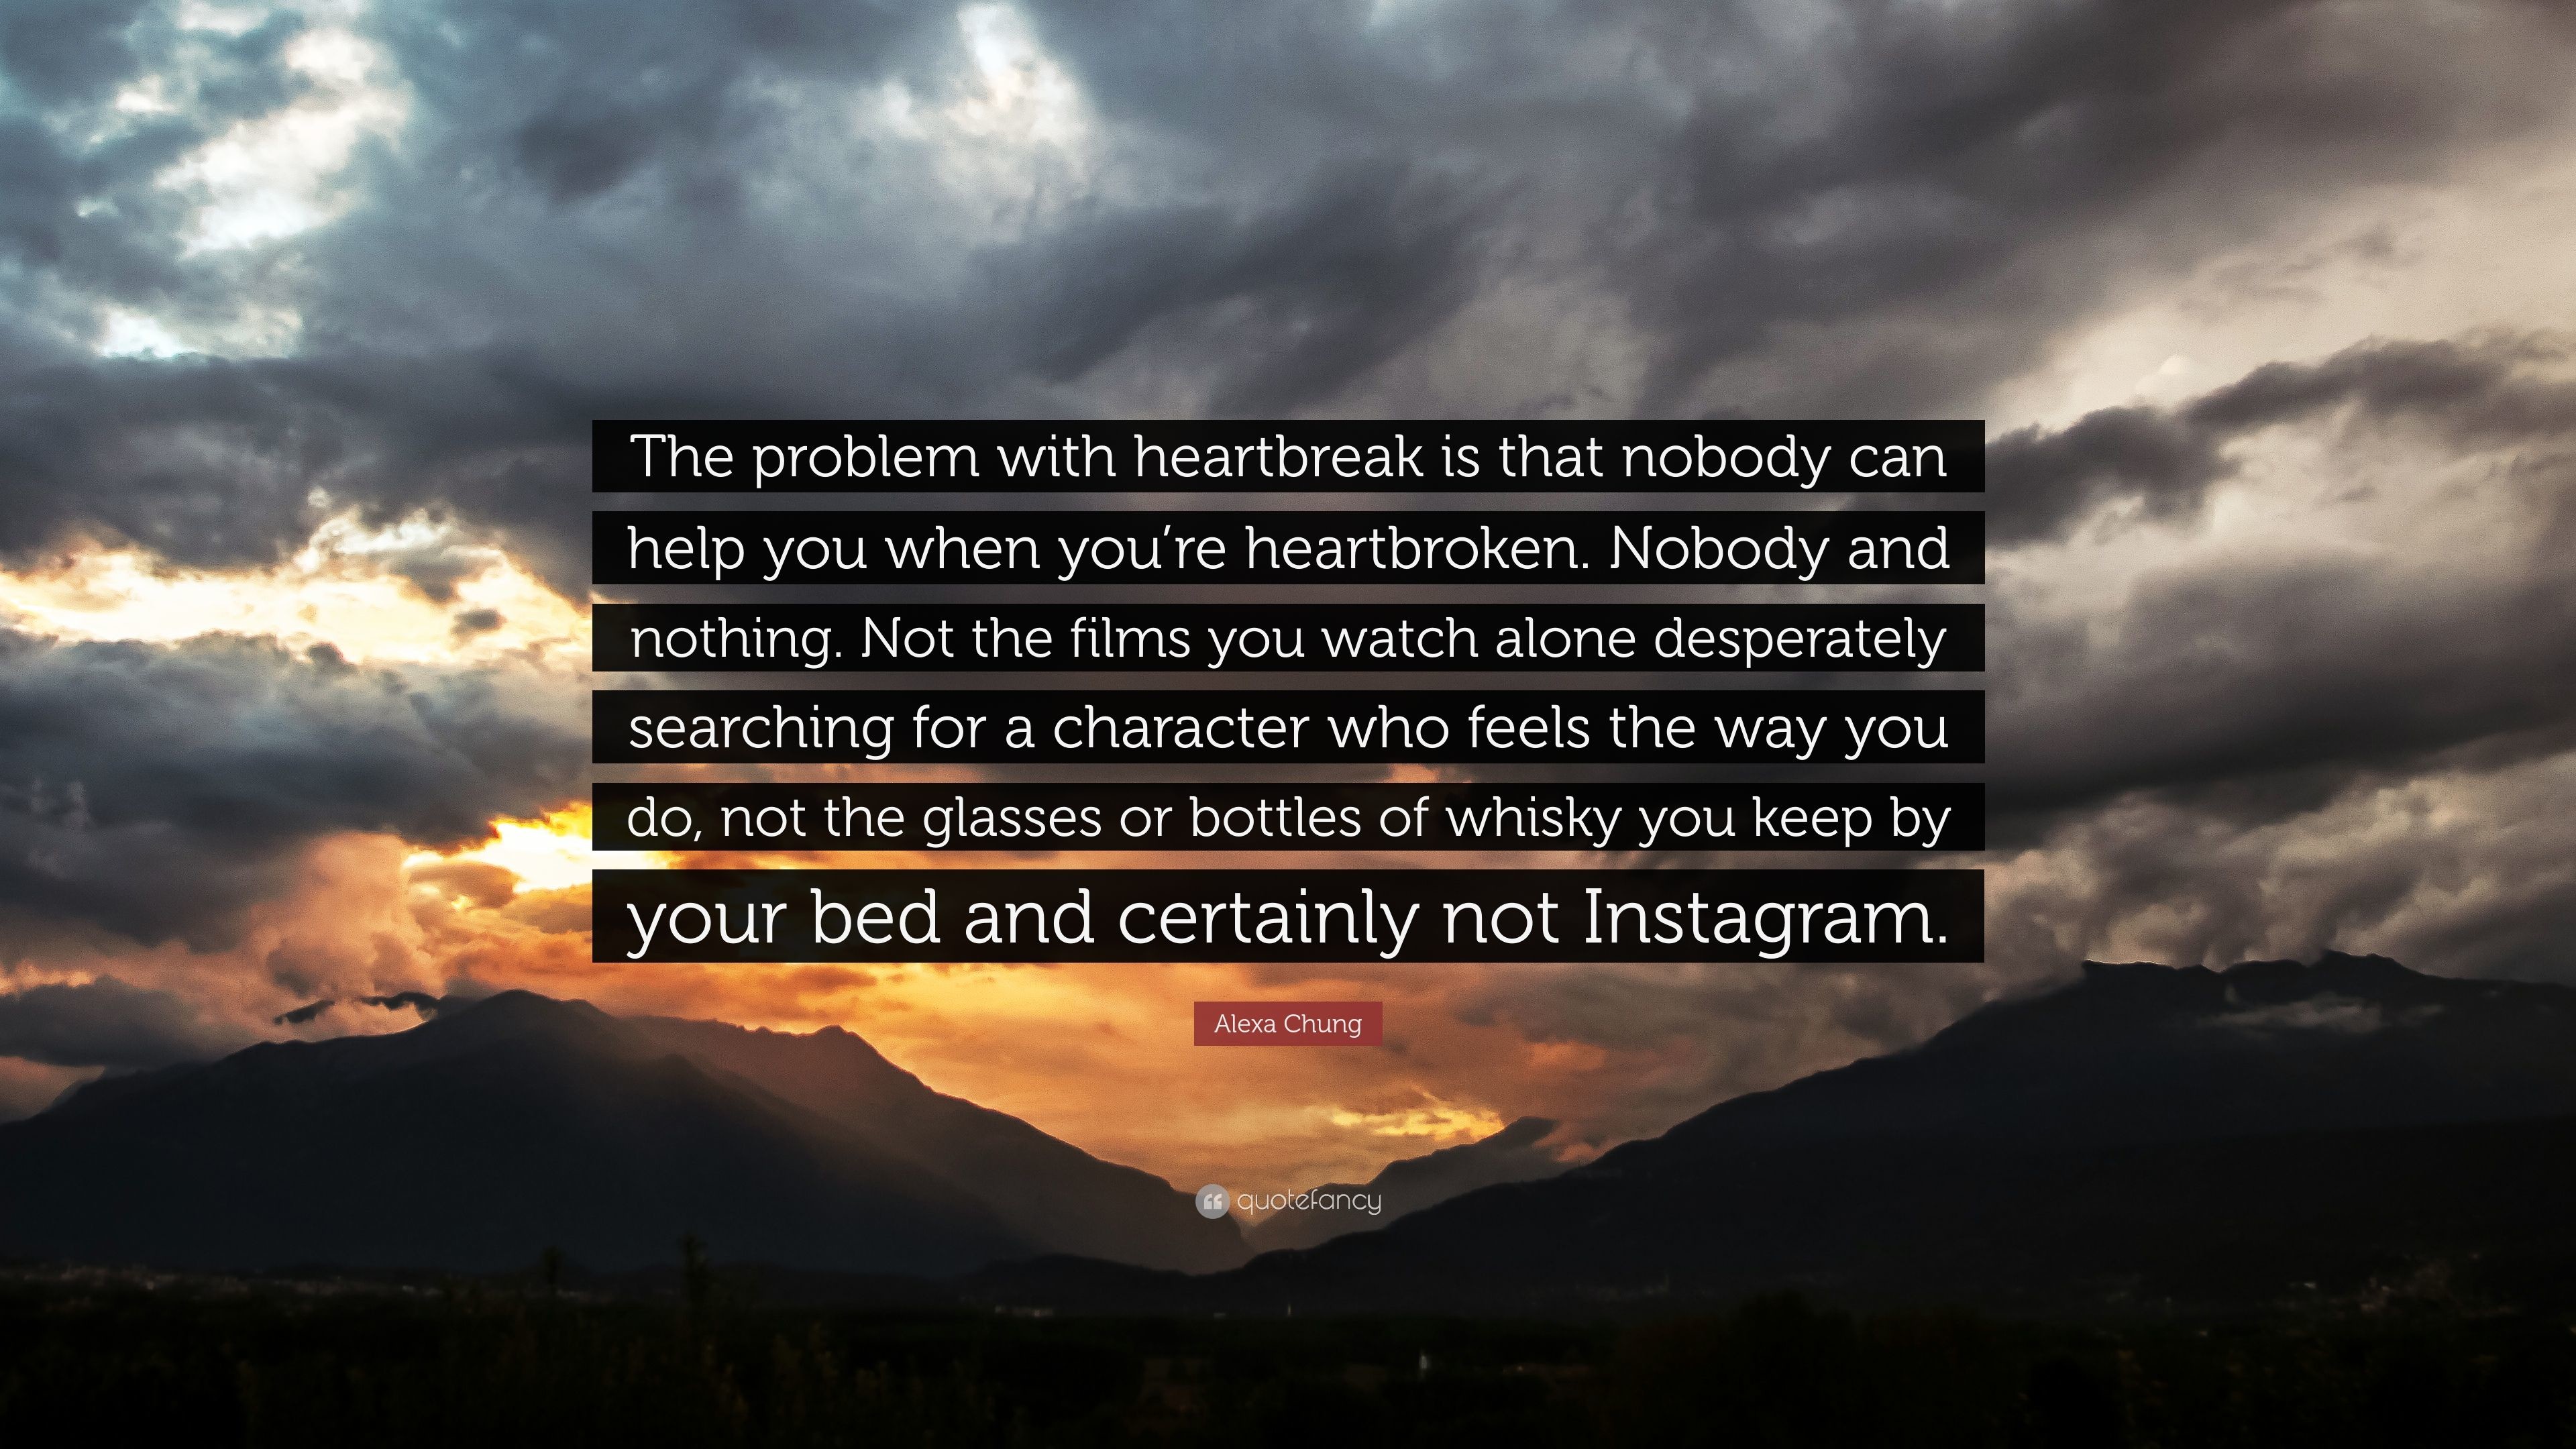 3840x2160 Alexa Chung Quote: “The problem with heartbreak is that nobody can help you  when